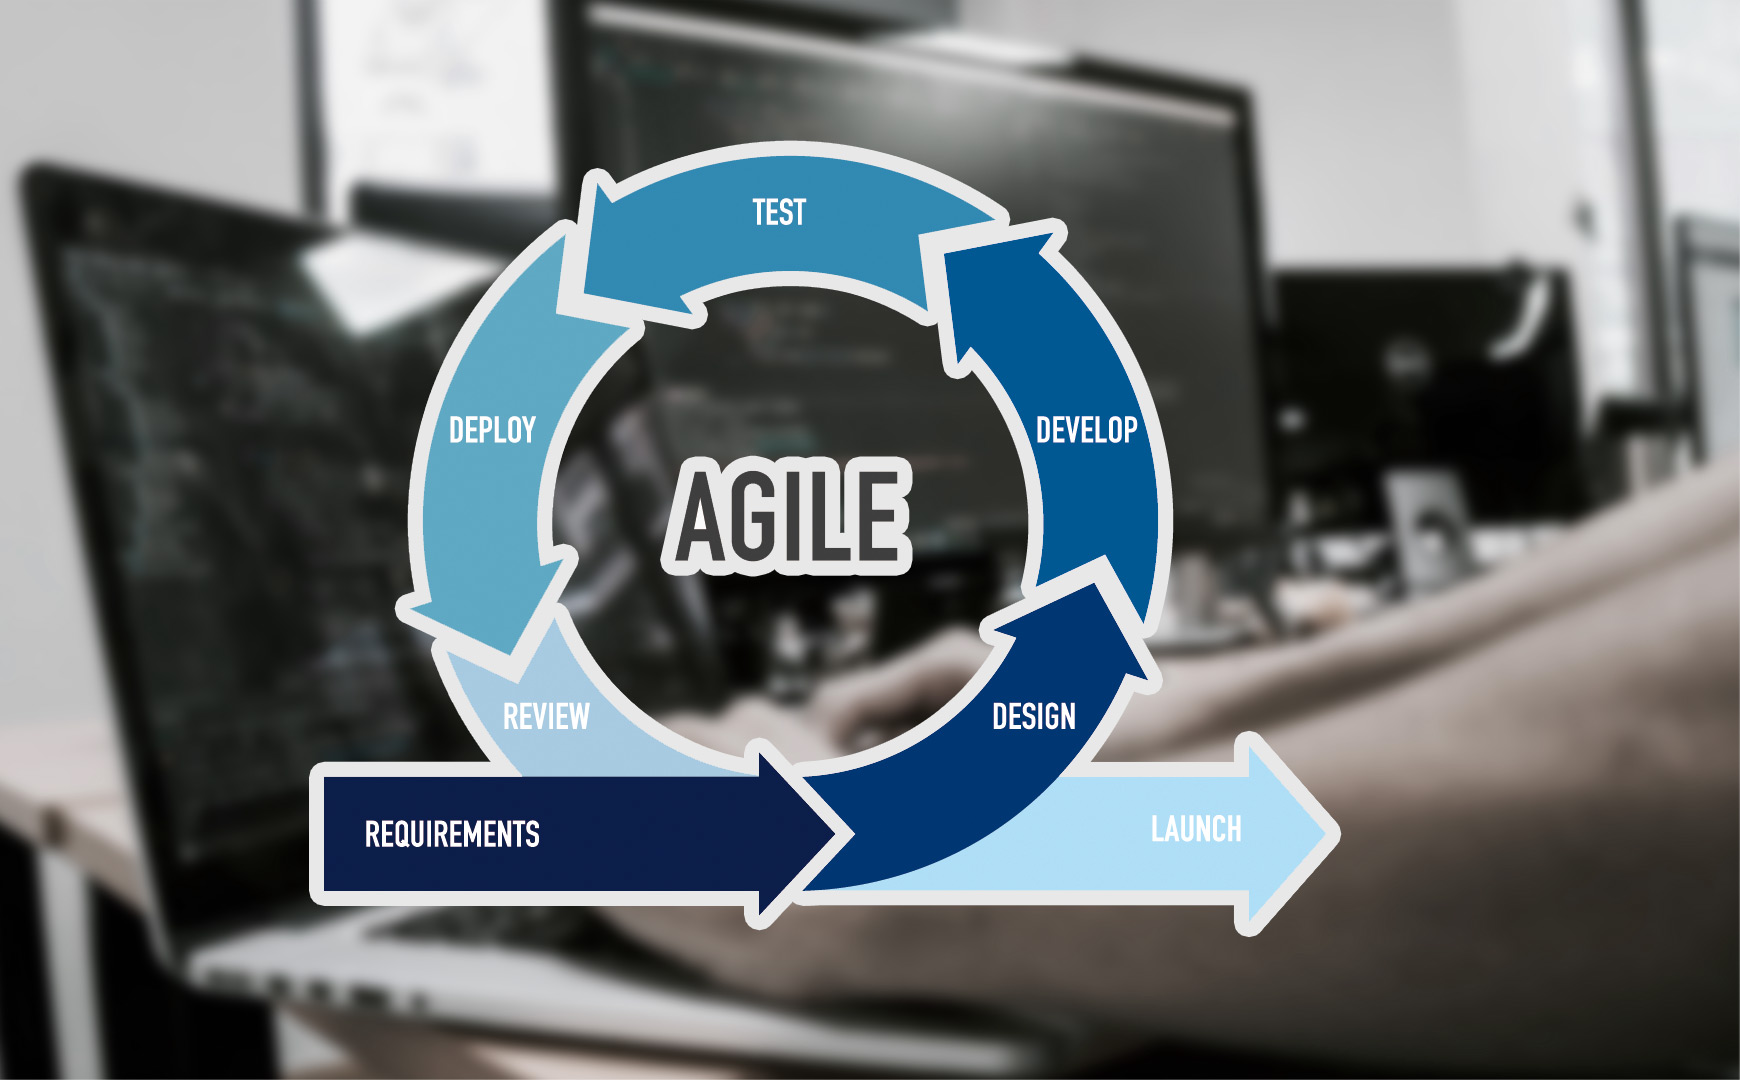 Through agile development, we immediately respond to the changes in business conditions